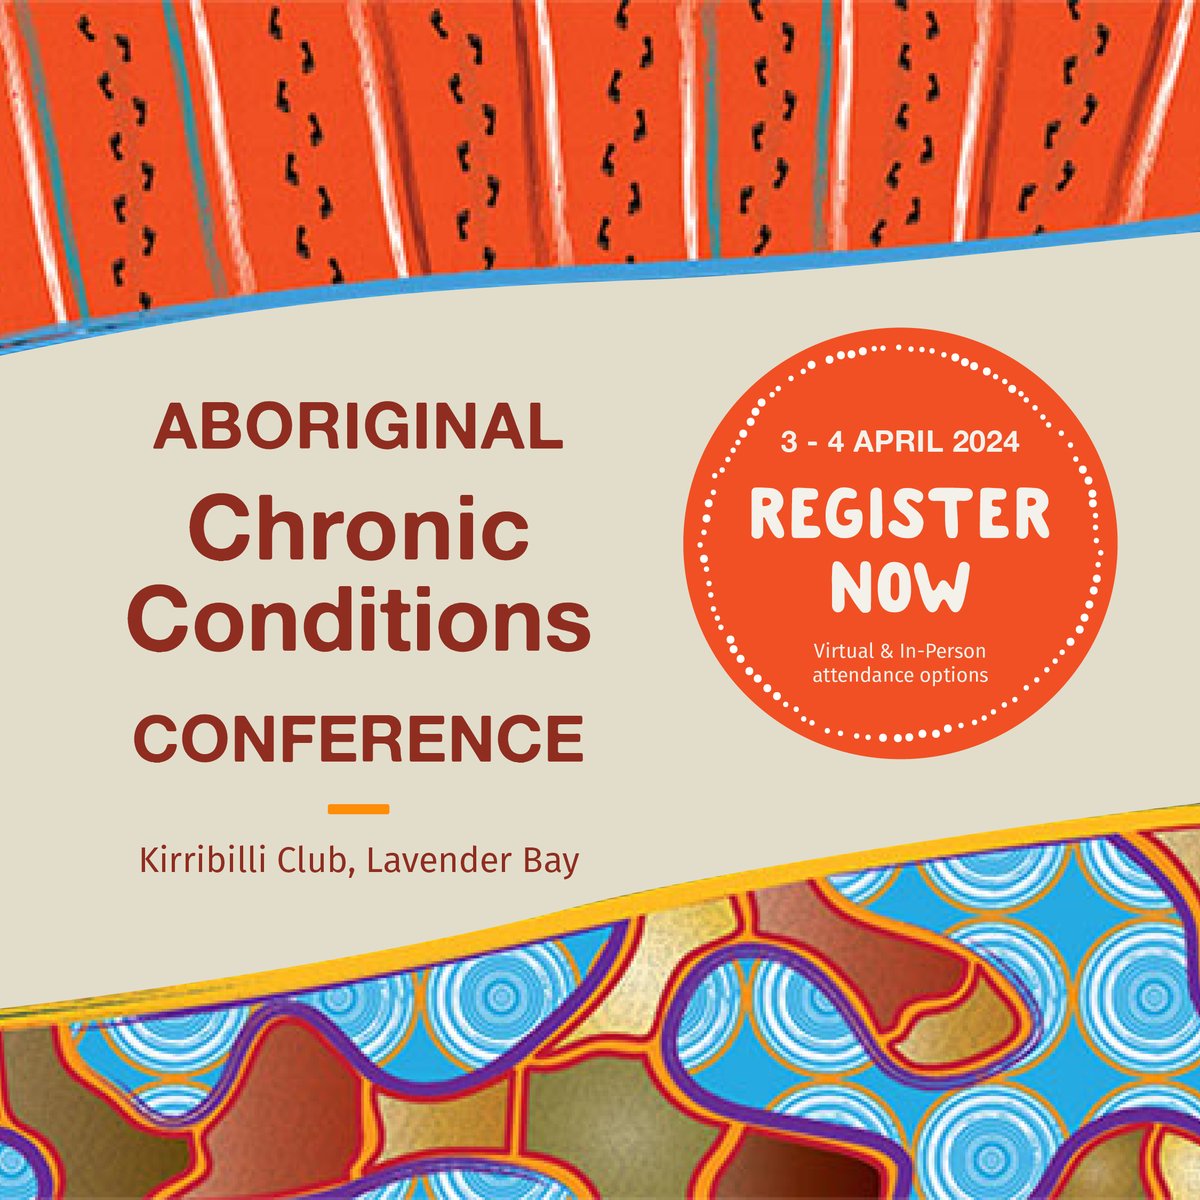 We are excited to announce the 2024 Aboriginal Chronic Care Conference, hosted by the ACCN and The AH&MRC. This year's conference theme is Closing The Gap Priority Reform Areas and Aboriginal Chronic Care. #ClosingTheGap Find out more here: ahmrc.org.au/event/aborigin…